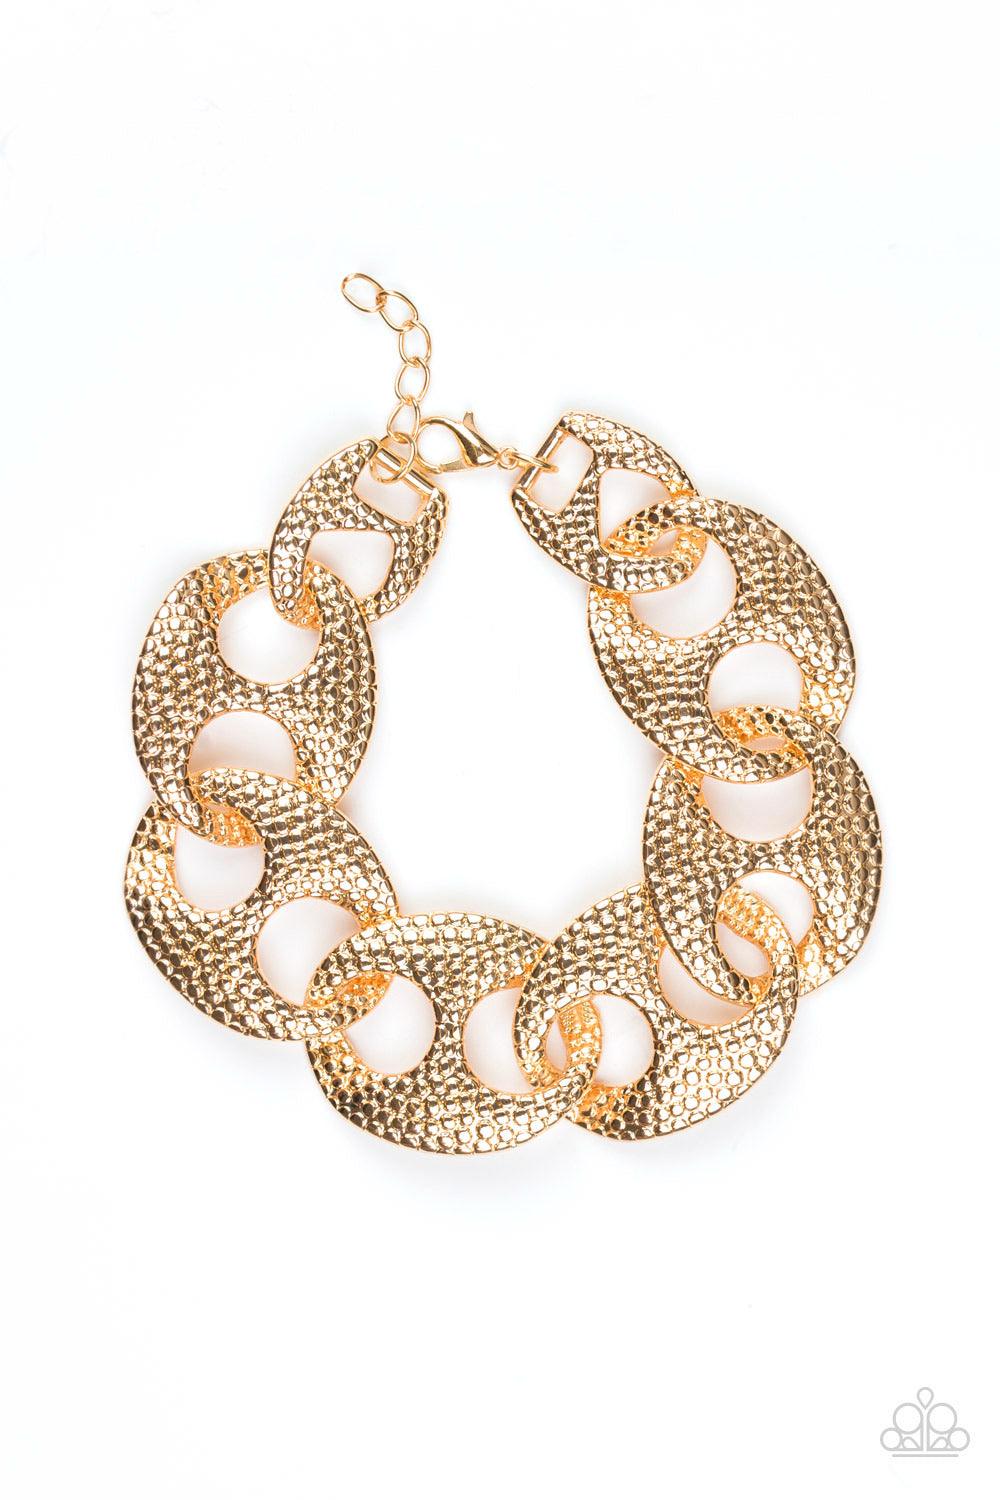 Paparazzi Accessories Casual Connossieur - Gold Embossed in shimmery circular patterns, asymmetrical gold frames link across the wrist for a casually industrial look. Features an adjustable clasp closure. Jewelry